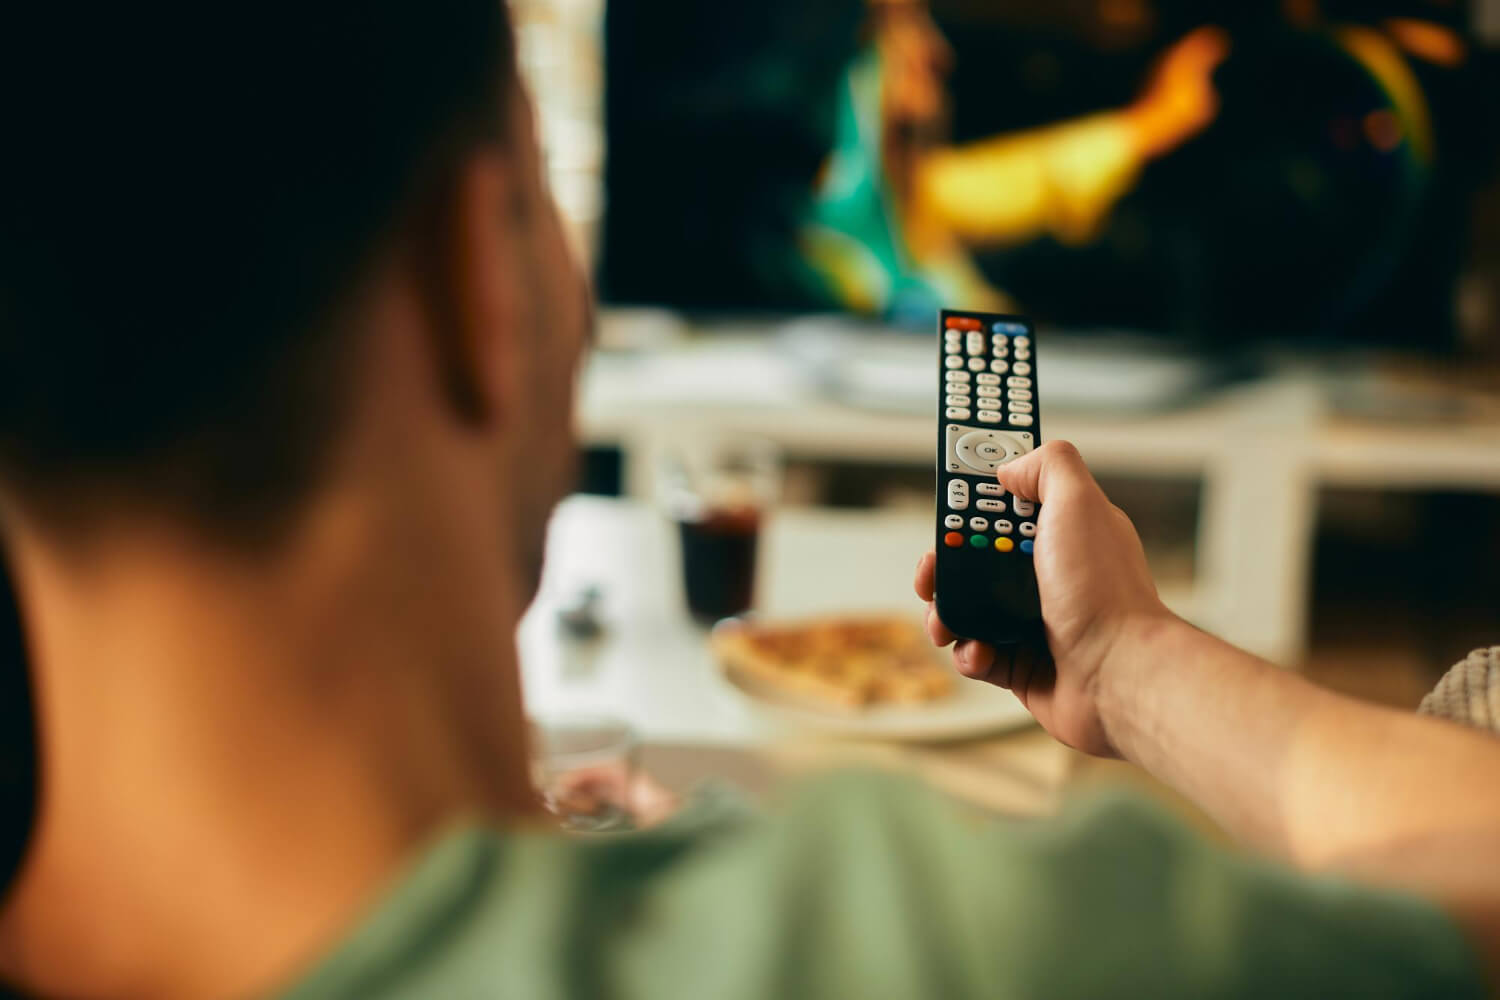 How Cloud TV is Changing the Way We Watch TV